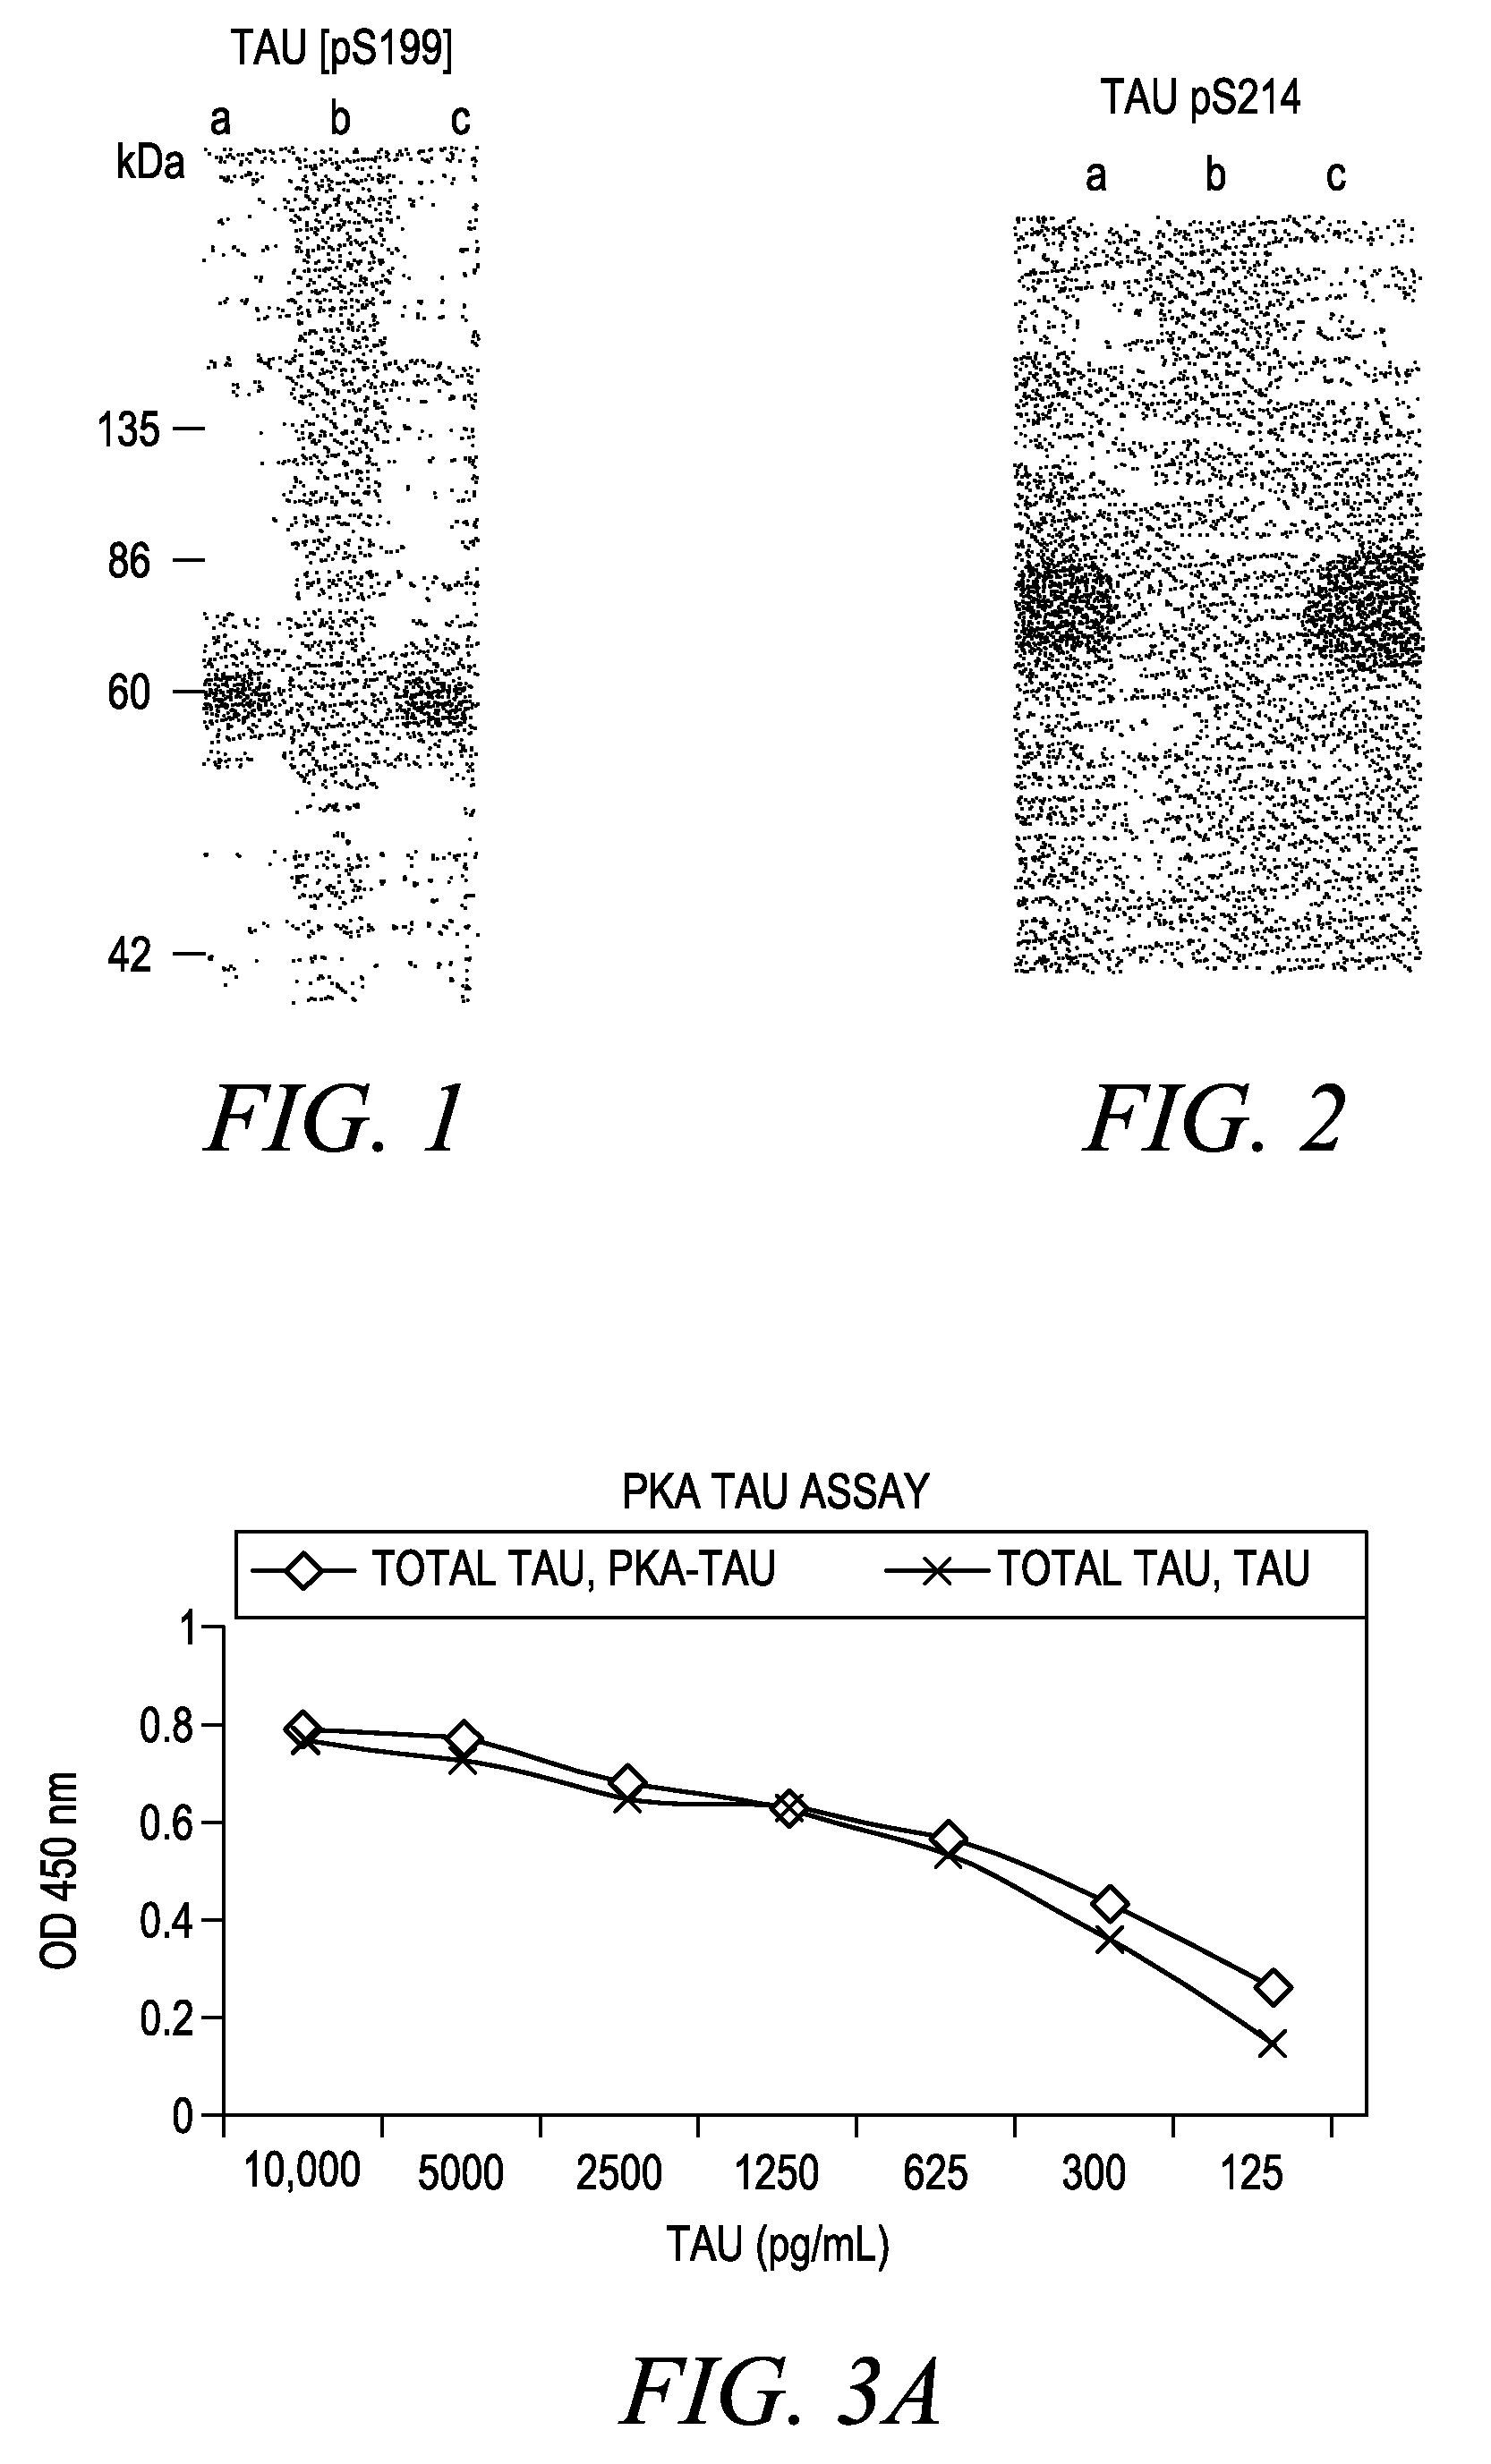 Method for quantifying phosphokinase activity on proteins